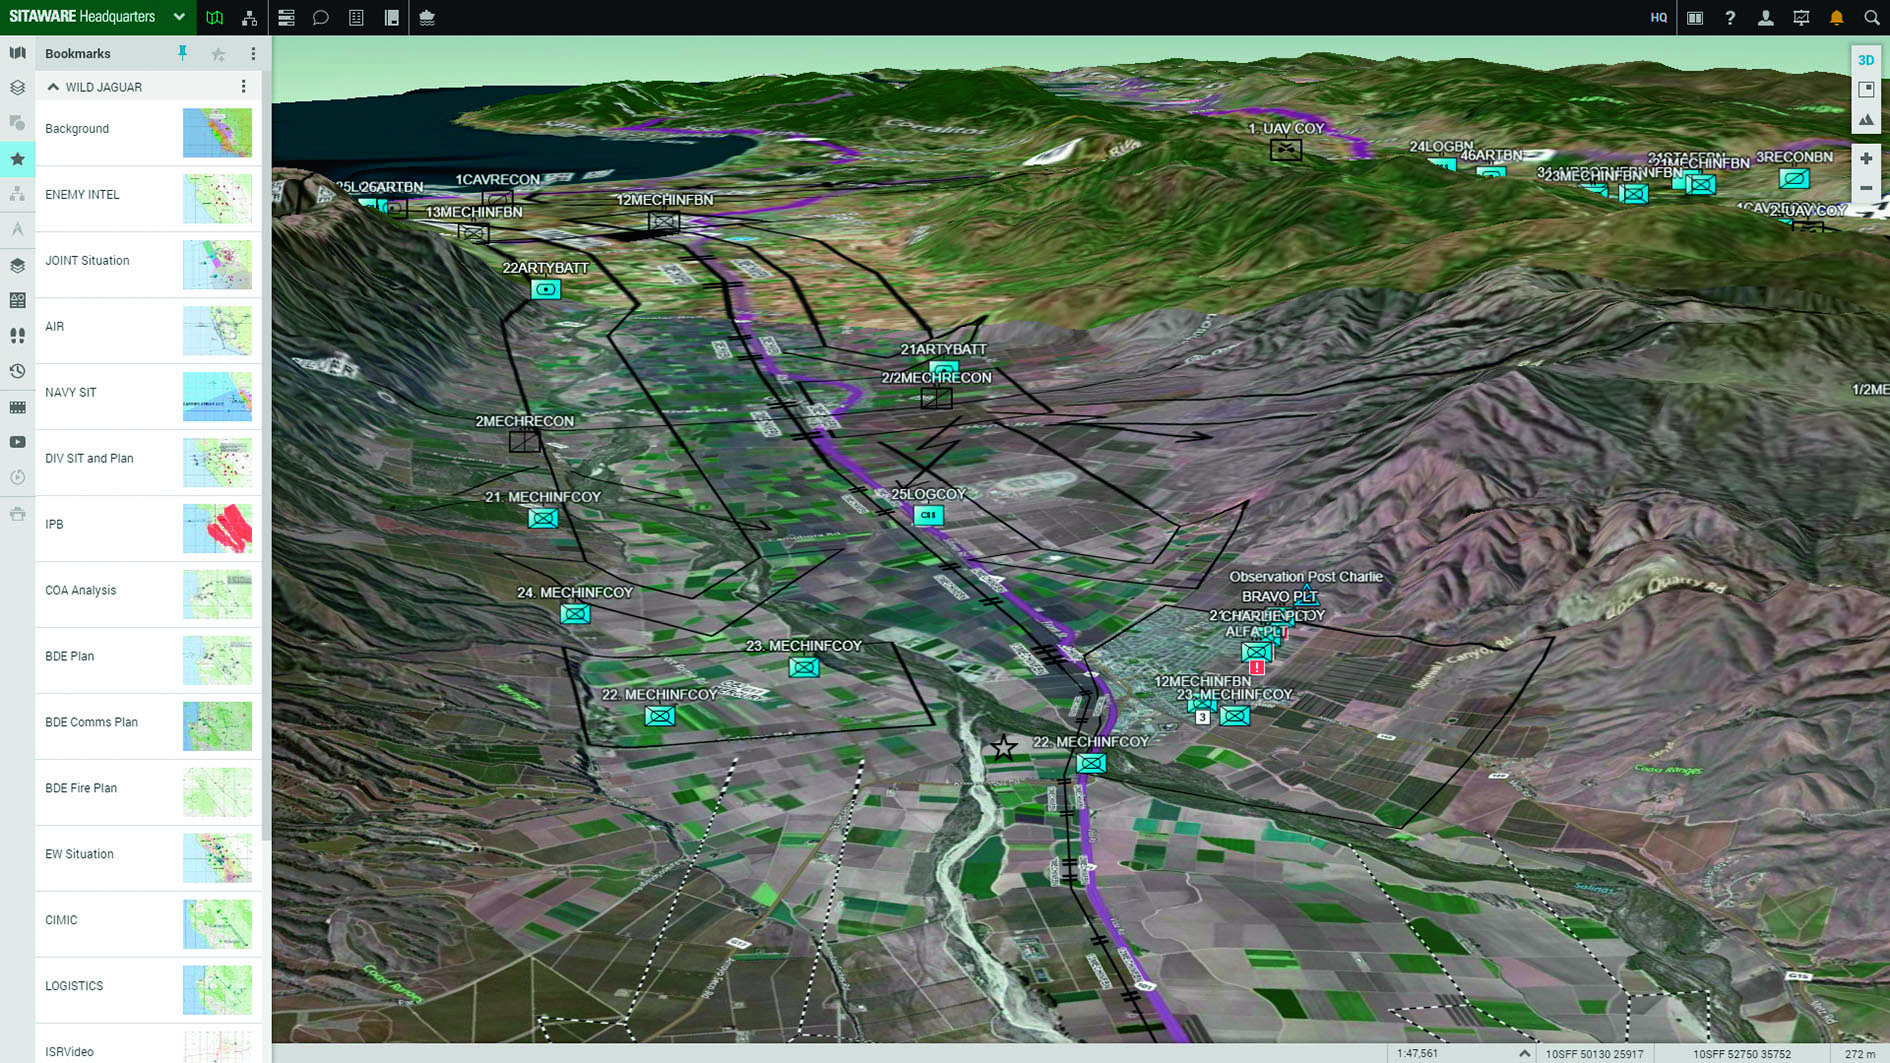 A screenshot for SitaWare HQ showing a 3D image using overhead imagery with the common operational picture overlay. Note the tabs on the left with overlays for different combat functions and plans.  (Systematic)